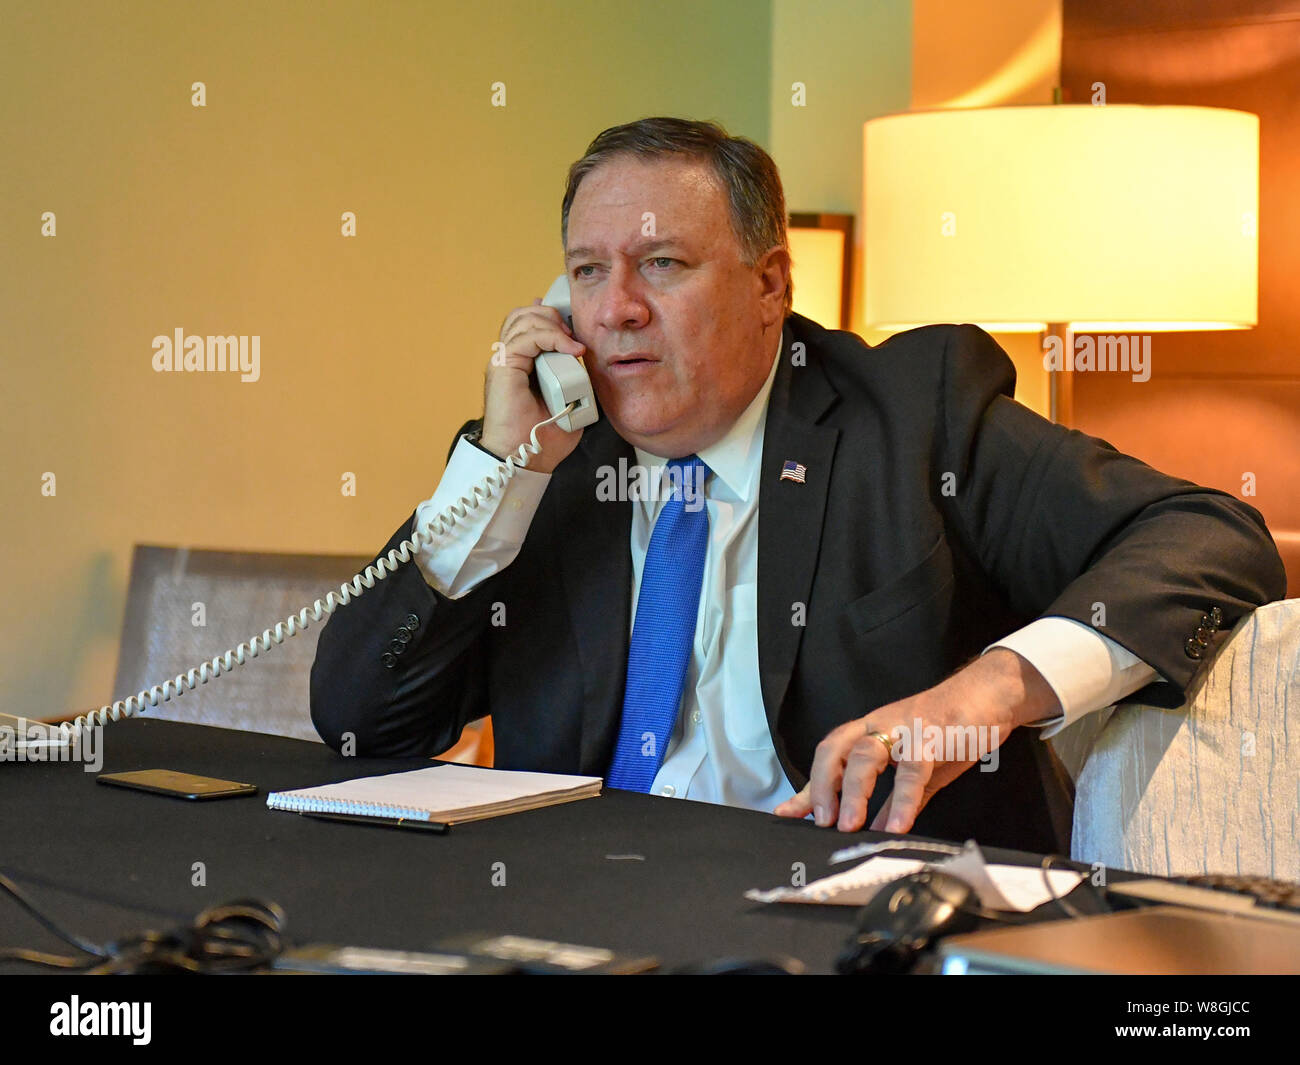 U.S. Secretary of State Mike Pompeo chats with Japanese Foreign Minister Taro Kono and Republic of Korea Foreign Minister Kang Kyung-wha via telephone Stock Photo